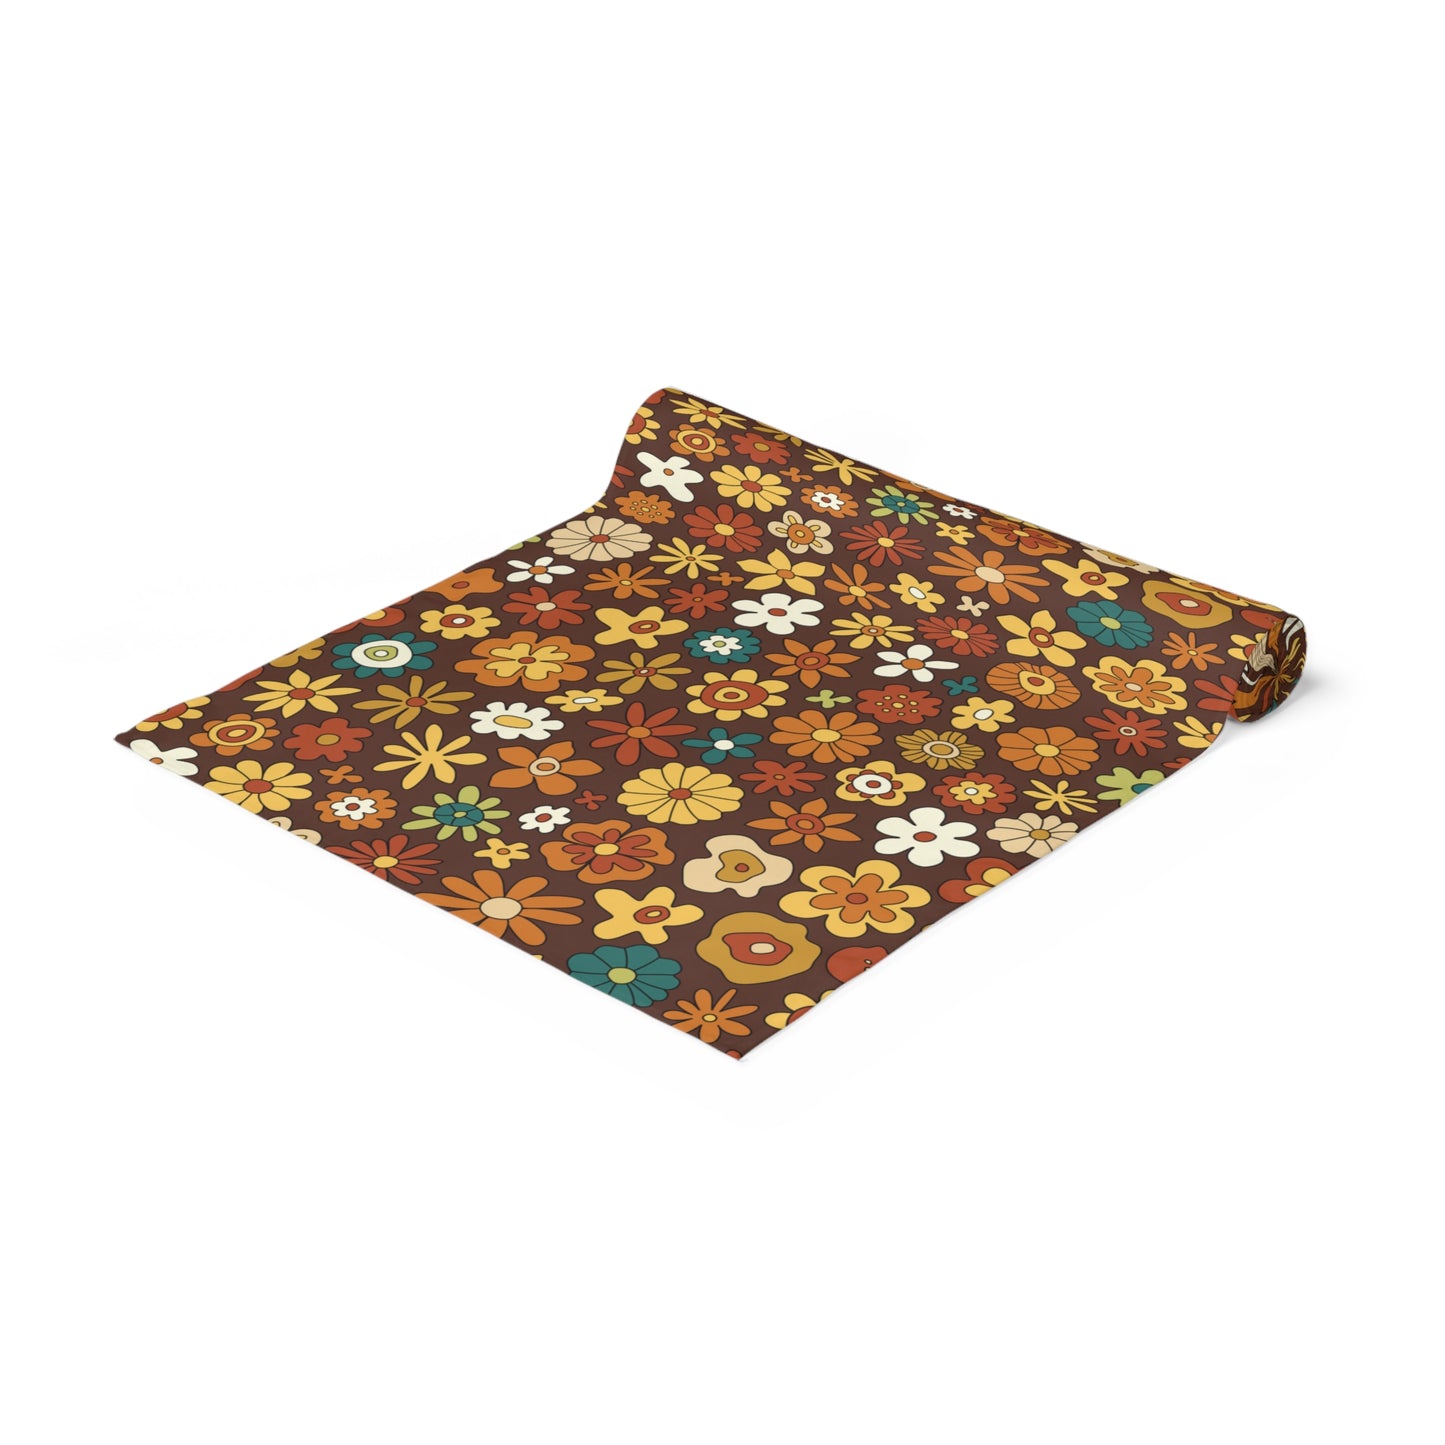 Retro 60s 70s Groovy Floral Mid Century Modern Brown Table Runner